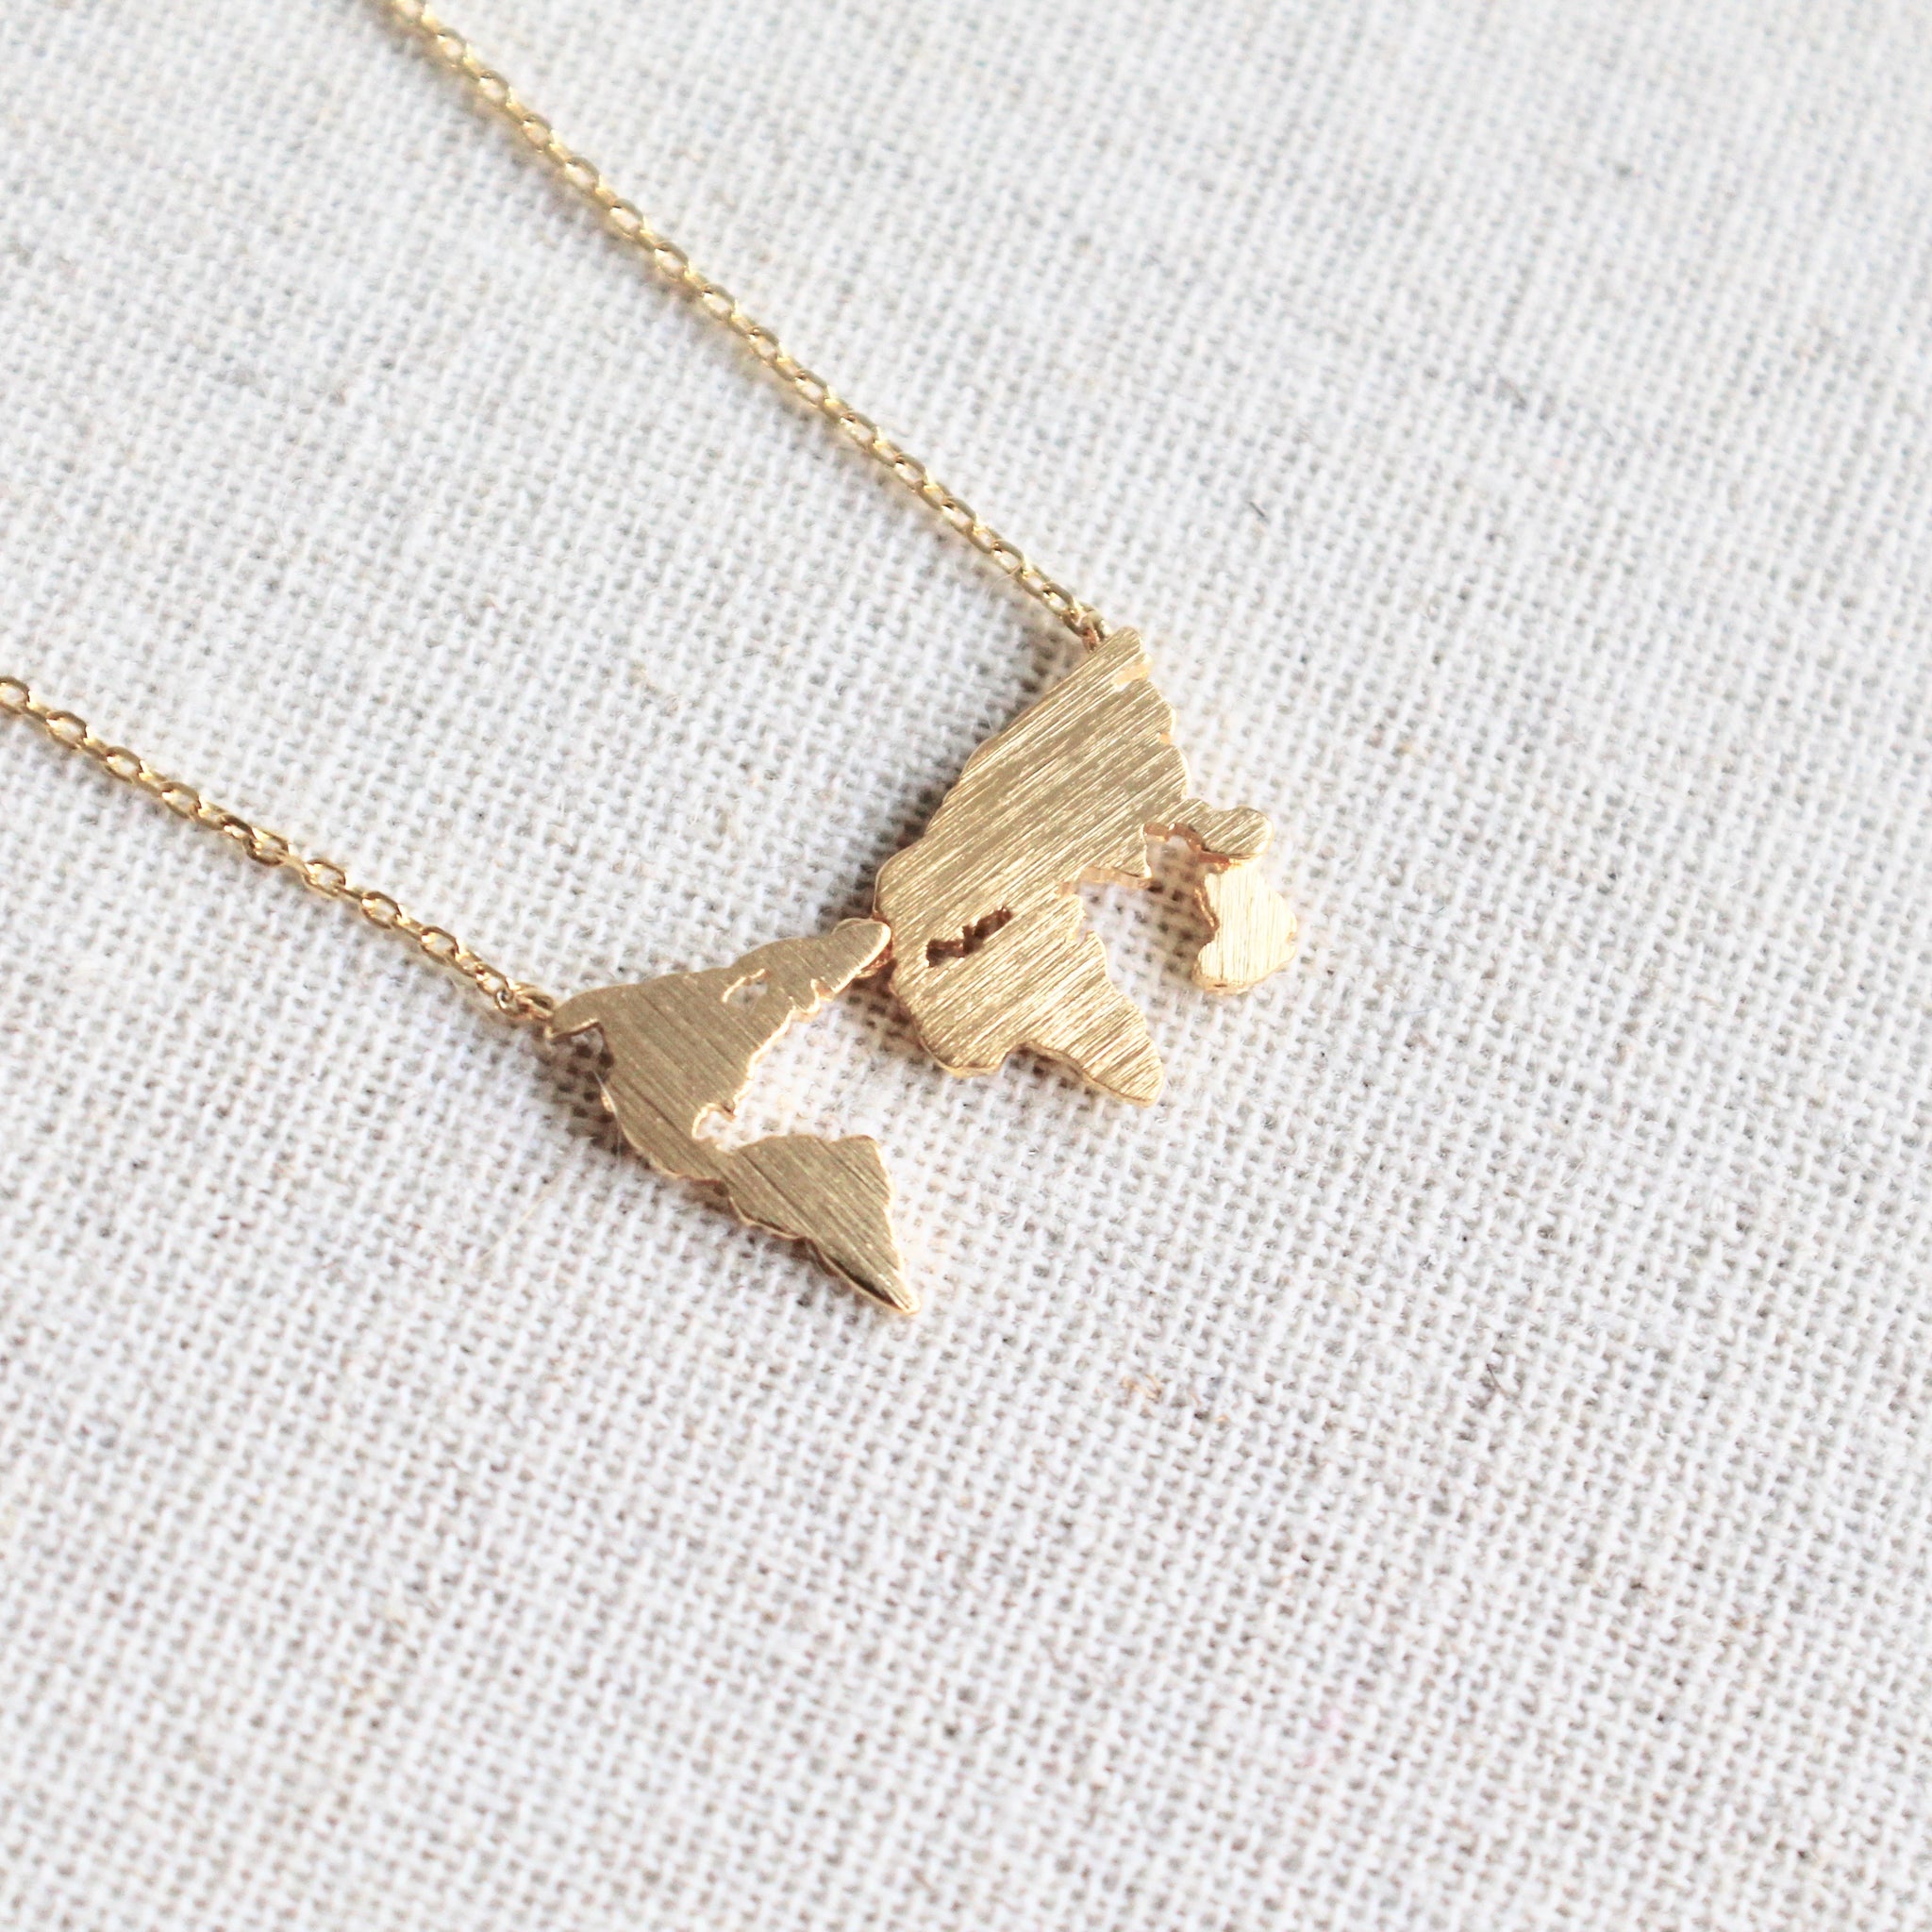 World map necklace - Lily Lough Jewelry